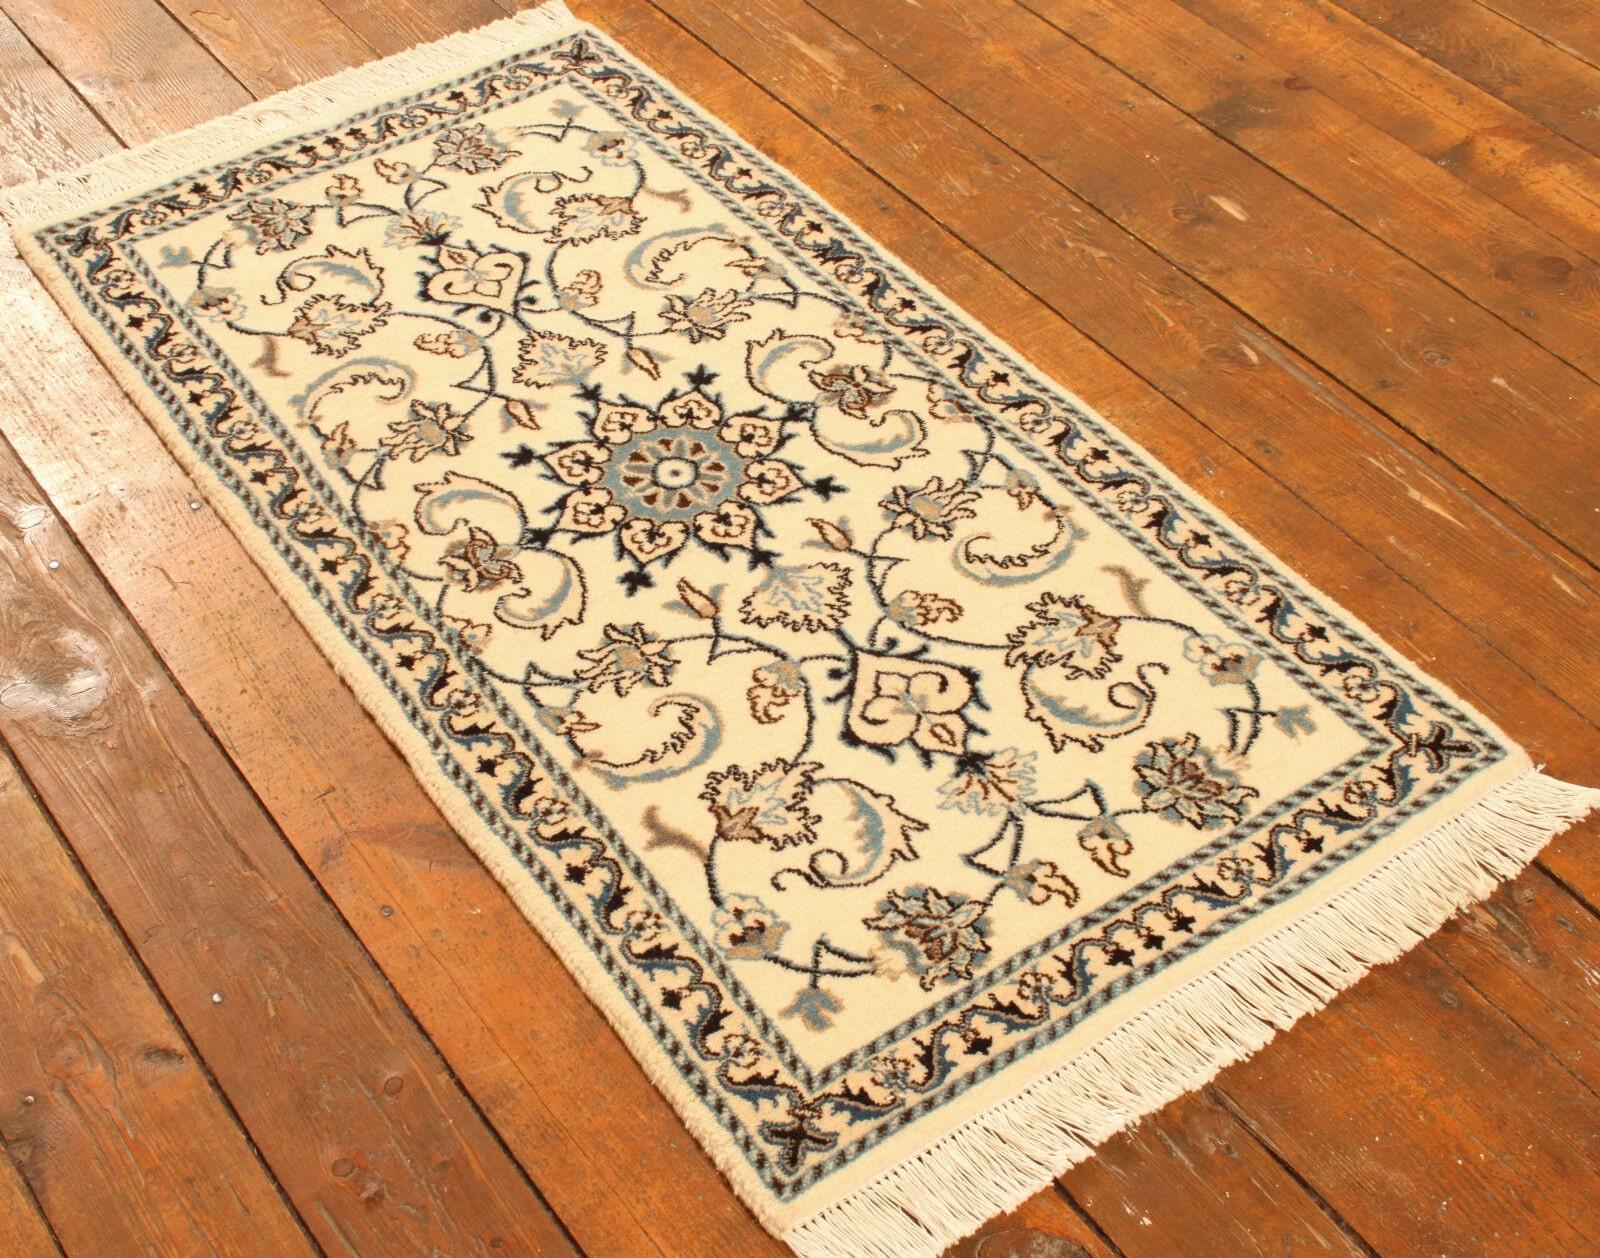 Wool Handmade Vintage Persian Style Nain Rug 2.2' x 4.4', 1990s - 1T16 For Sale